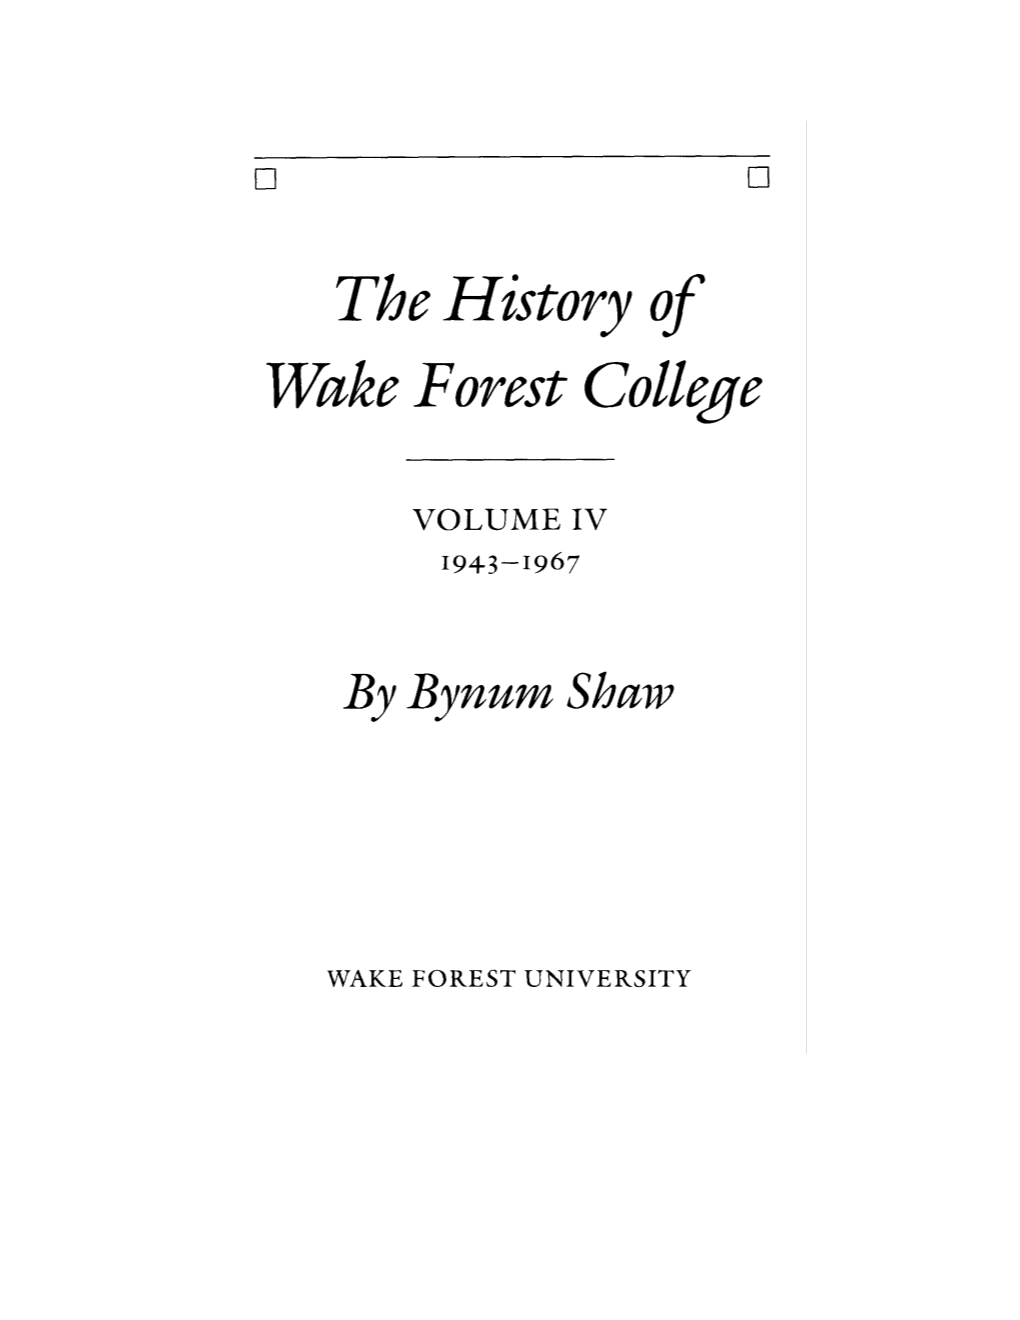 The History of Wake Forest College, Volume IV, 1943-1967